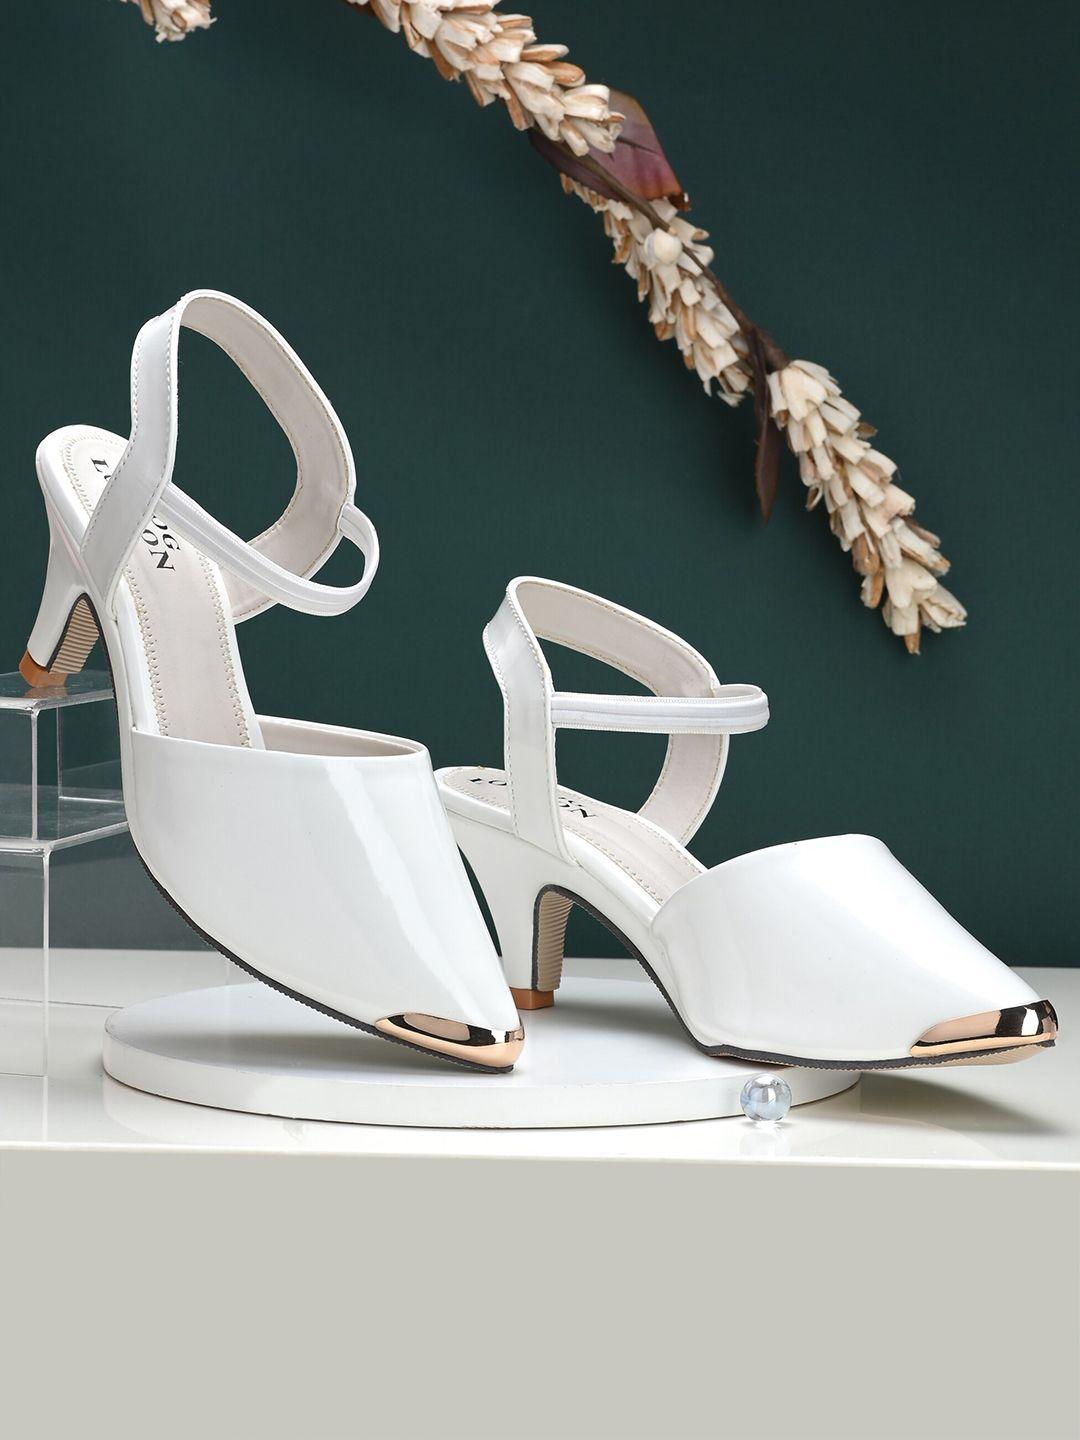 CLOG LONDON White Stiletto Pumps with Buckles